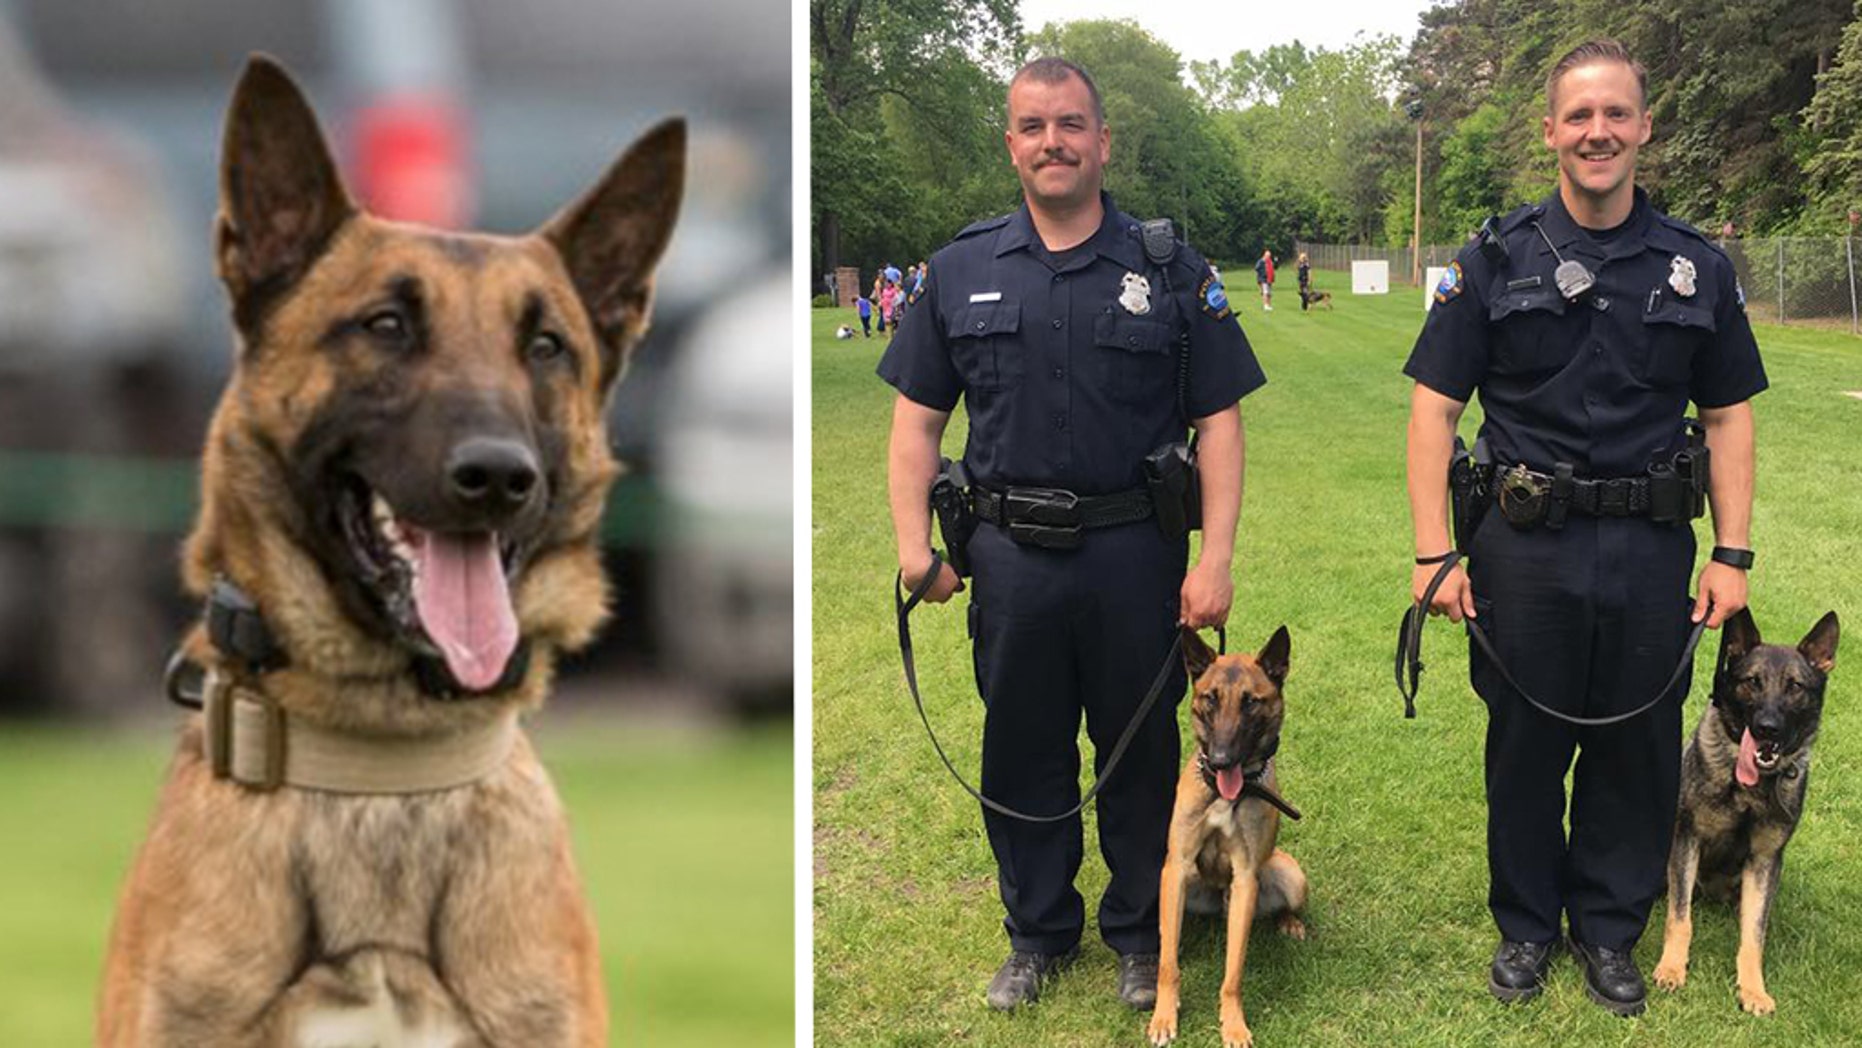 Minnesota officer wounded, K-9 killed in shoot-out with suspect